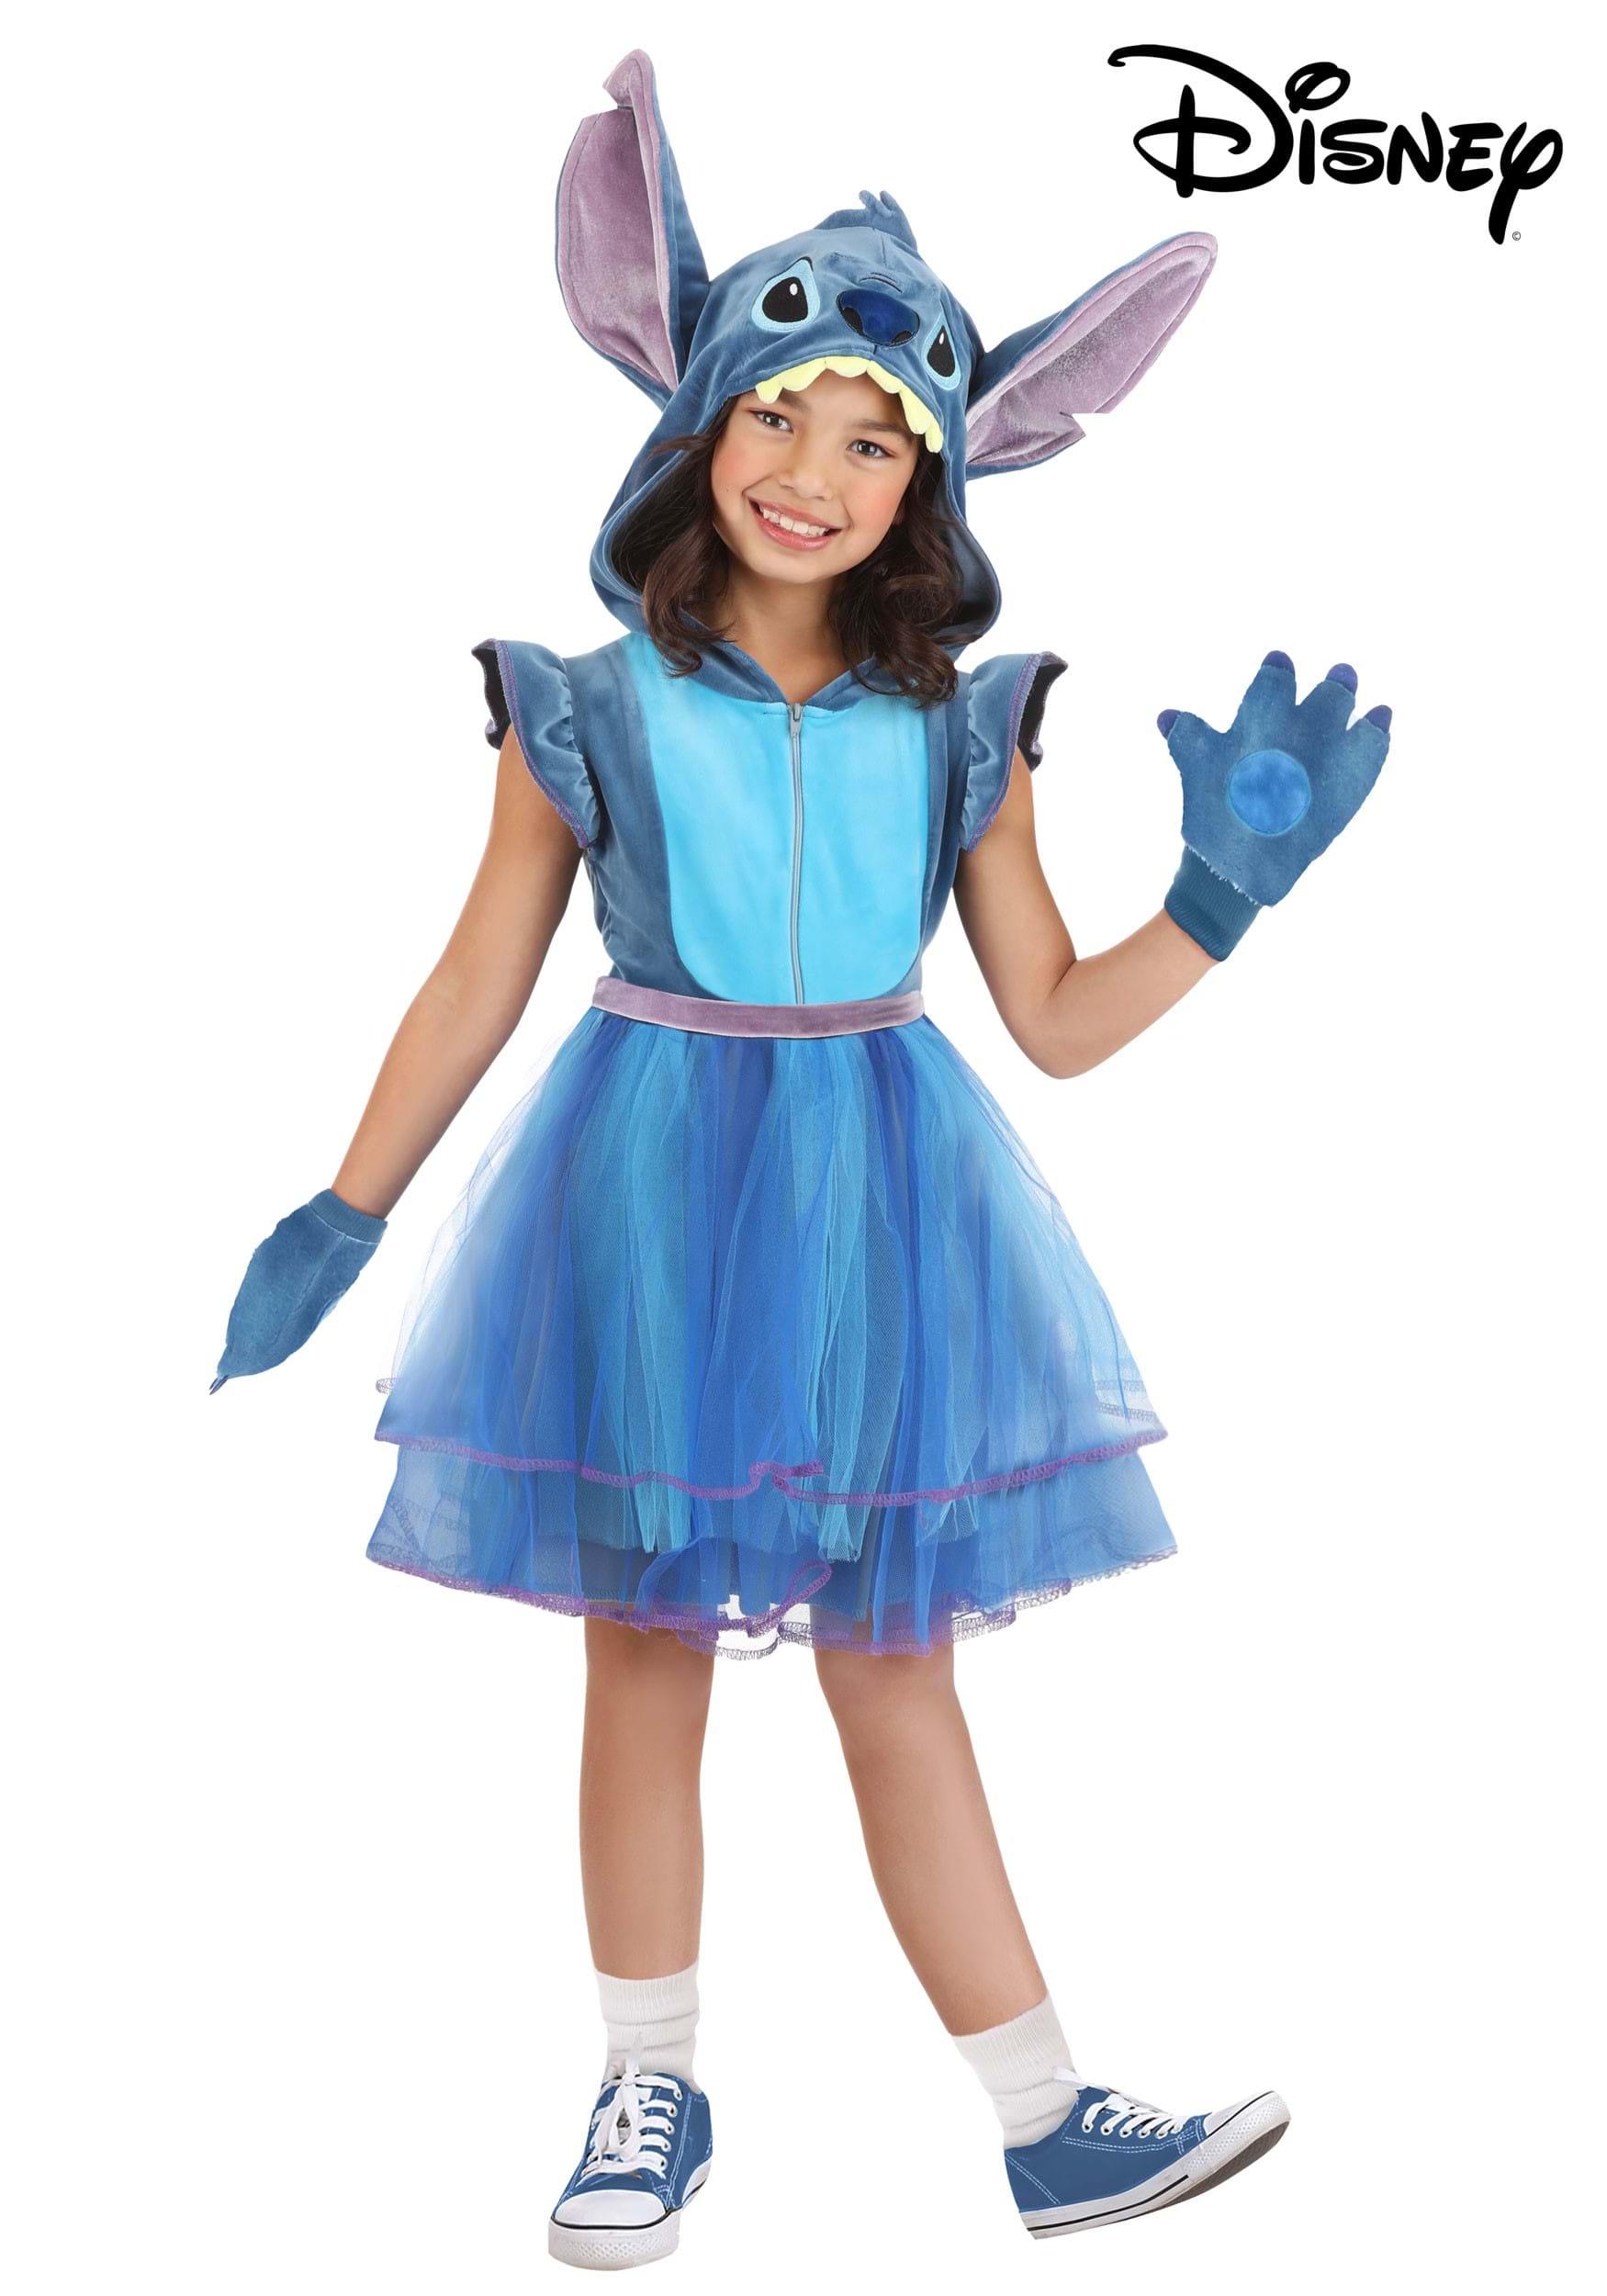 Disney stitch Adventure Dress Outfit Girls and similar items